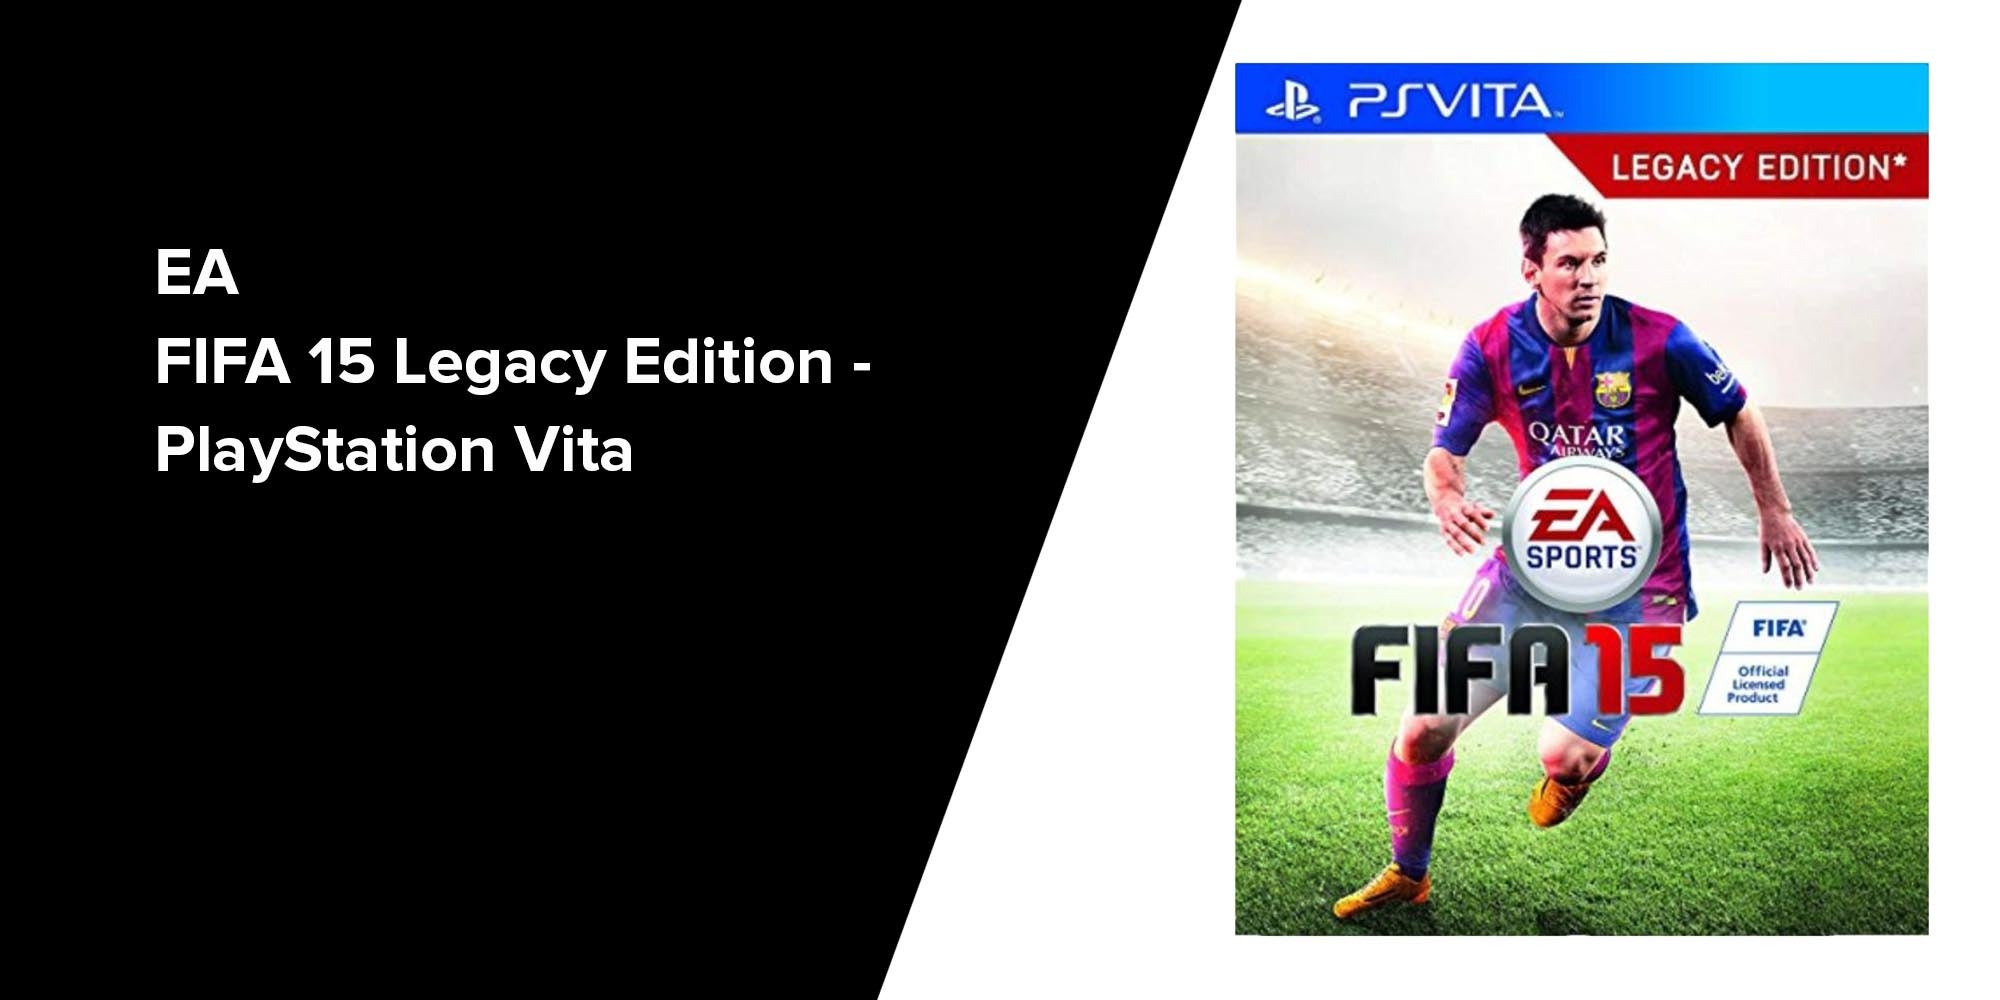 Buy Now Ea Fifa 15 Legacy Edition Sports Playstation Vita With Fast Delivery And Easy Returns In Dubai Abu Dhabi And All Uae